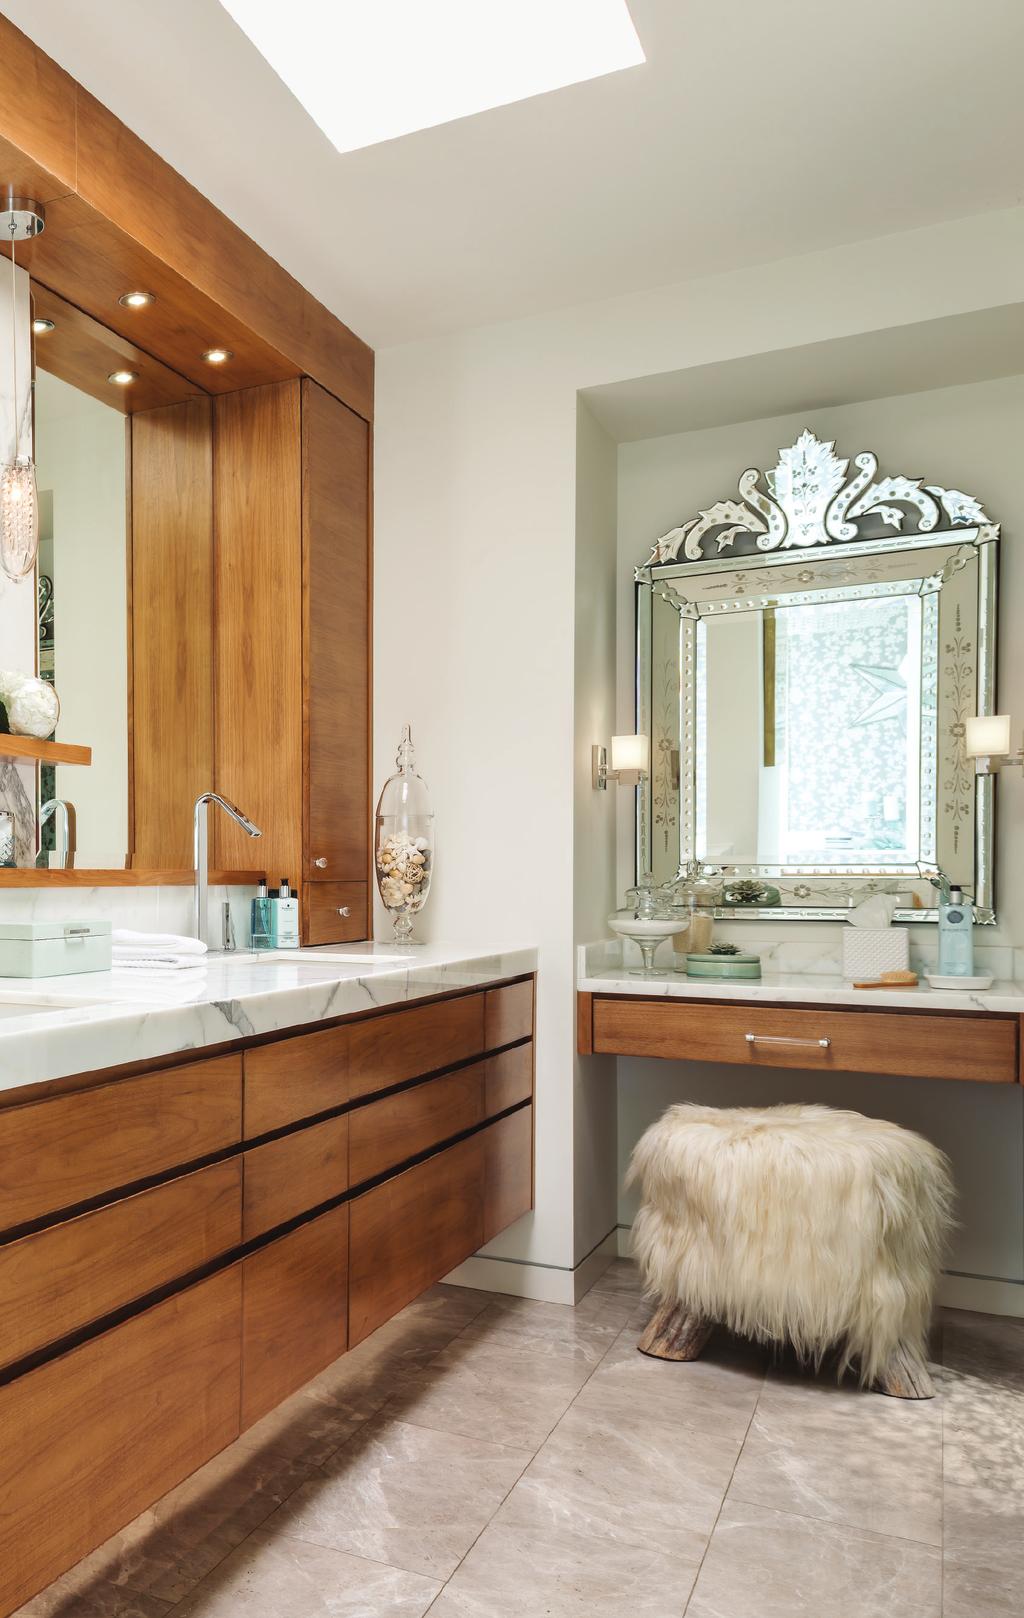 DESIGN TORONTO SPRING 2016 Candice s eclectic style means that a sleek, contemporary floating walnut vanity and makeup counter meet a furry Tibetan yak-hair stool in the master bathroom.